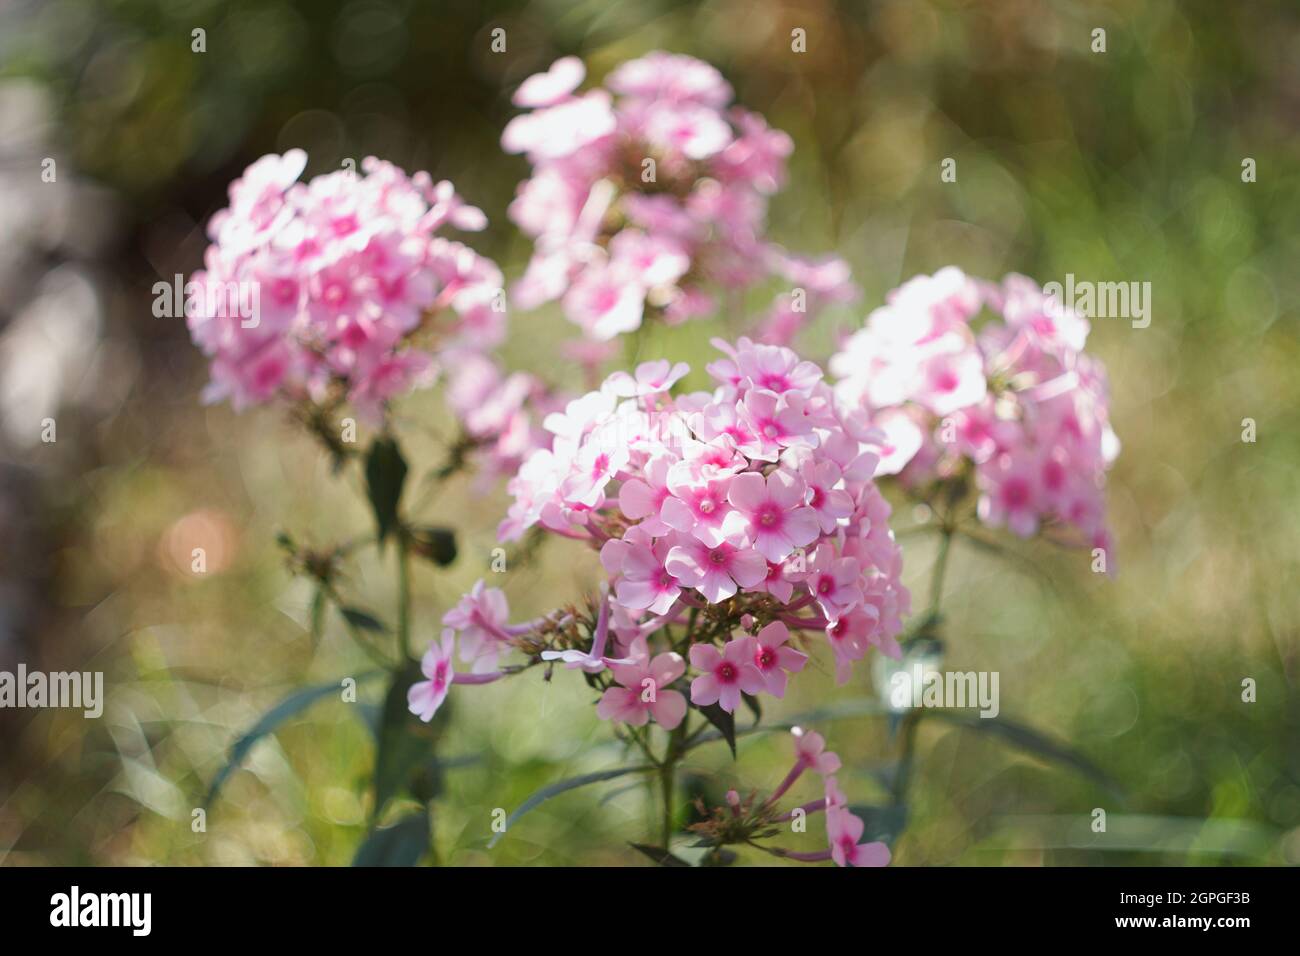 Garden Phloxes is blooming in autumn Stock Photo